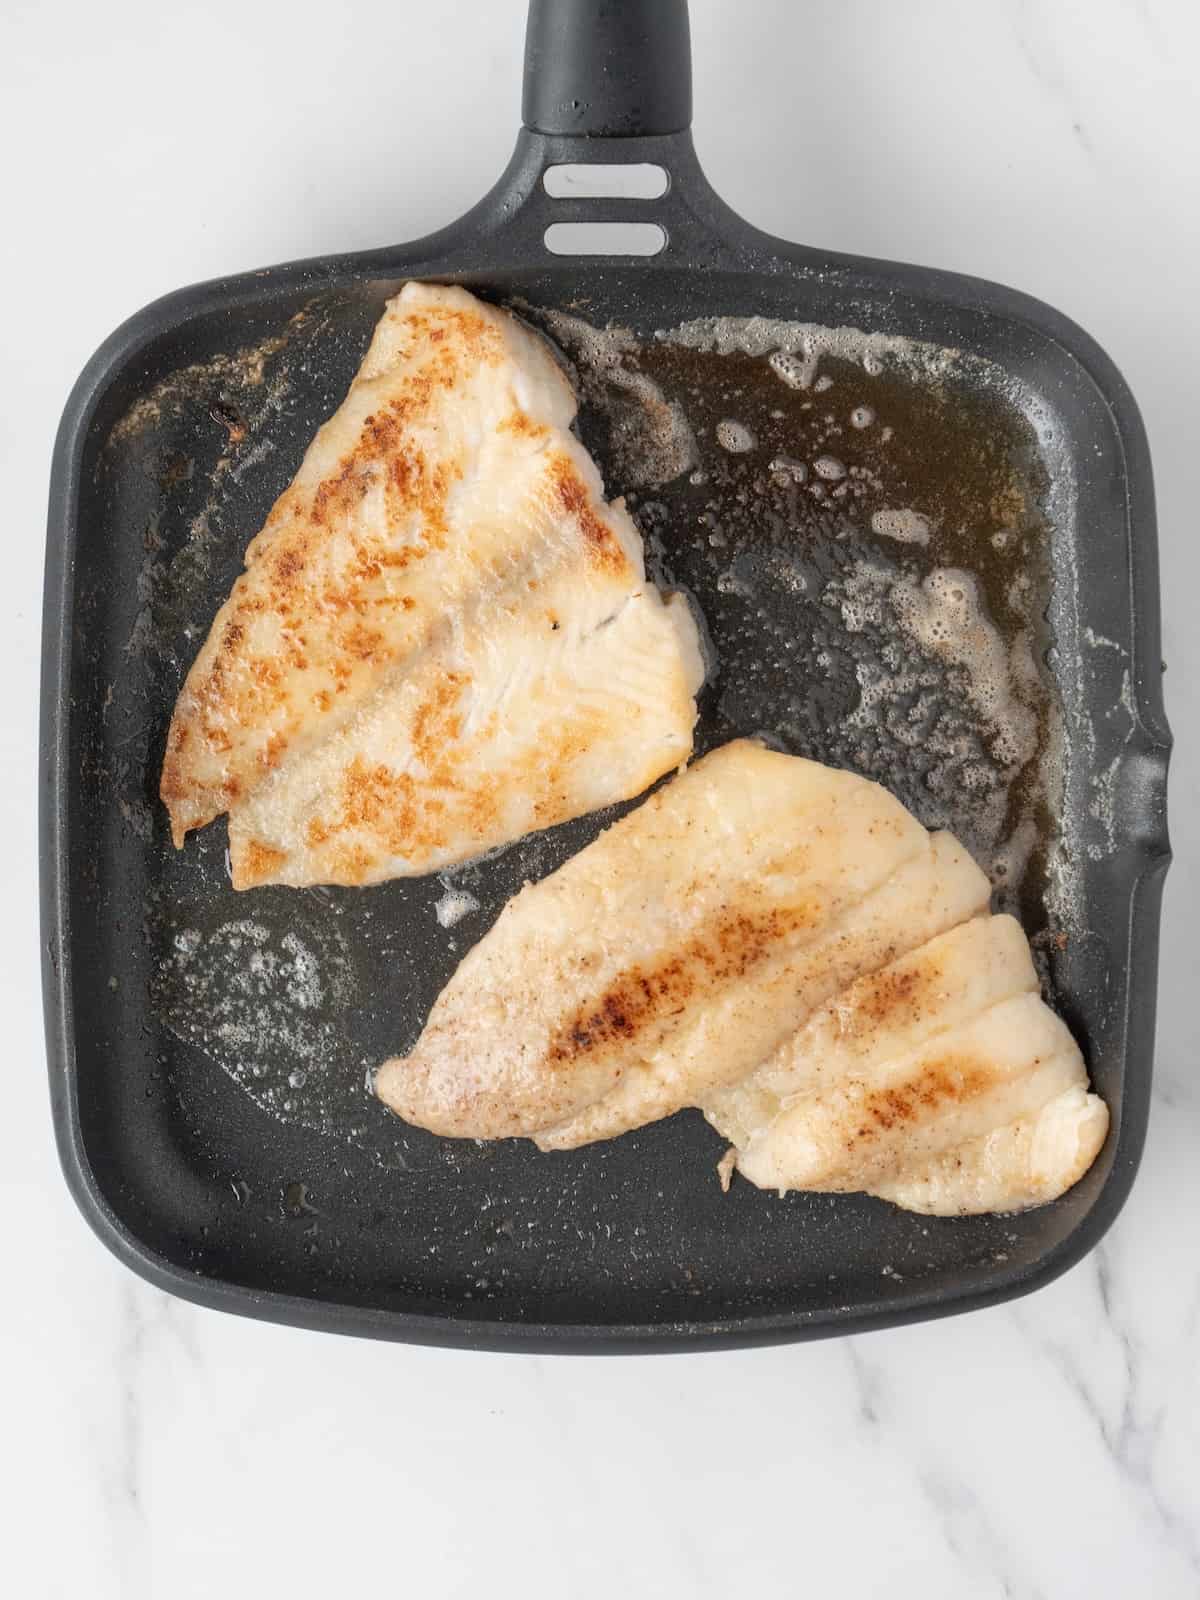 A nonstick skillet with butter, and two sole fillets cooked on the top side already and being cooked on the other side.